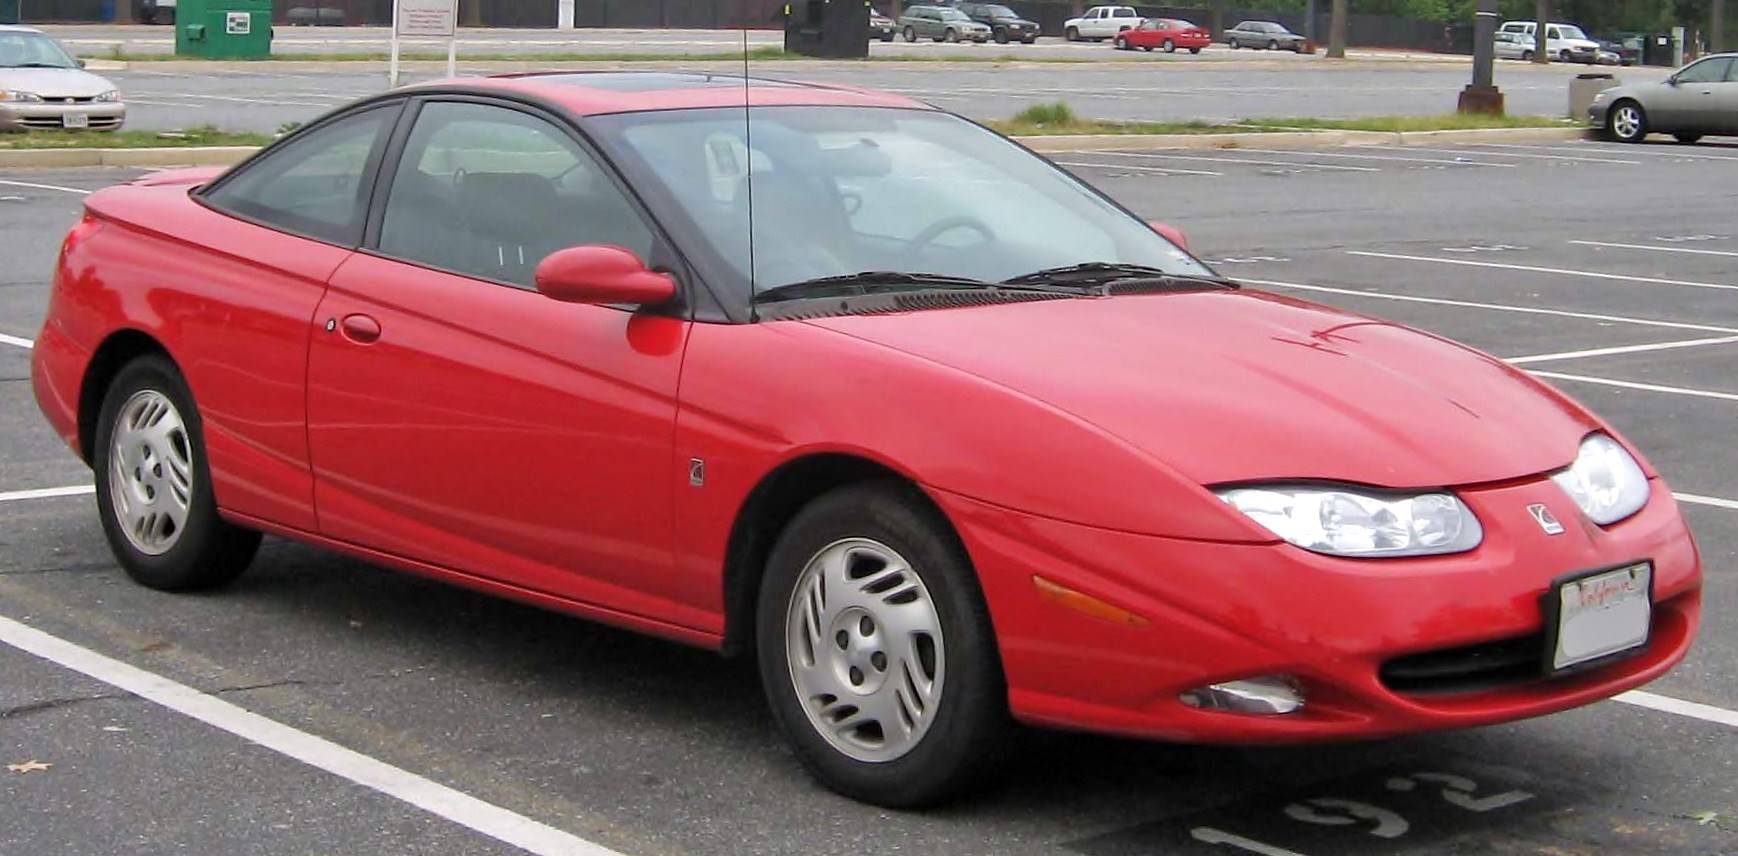 2001 Saturn SC1 : Latest Prices, Reviews, Specs, Photos and